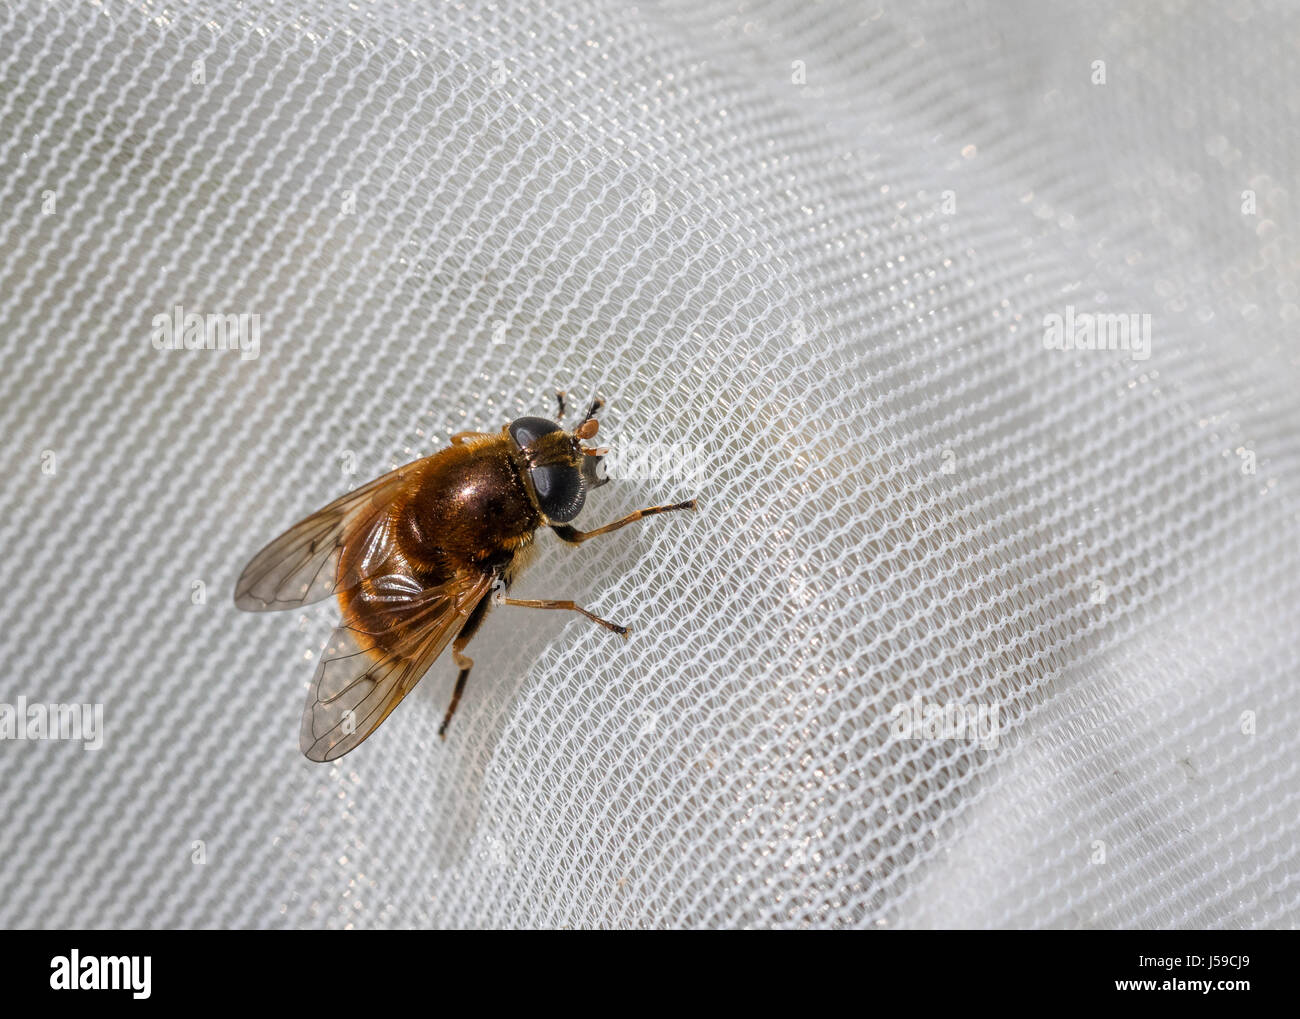 Hoverfly, Cheilosia chrysocoma, female caught in a net for science Stock Photo